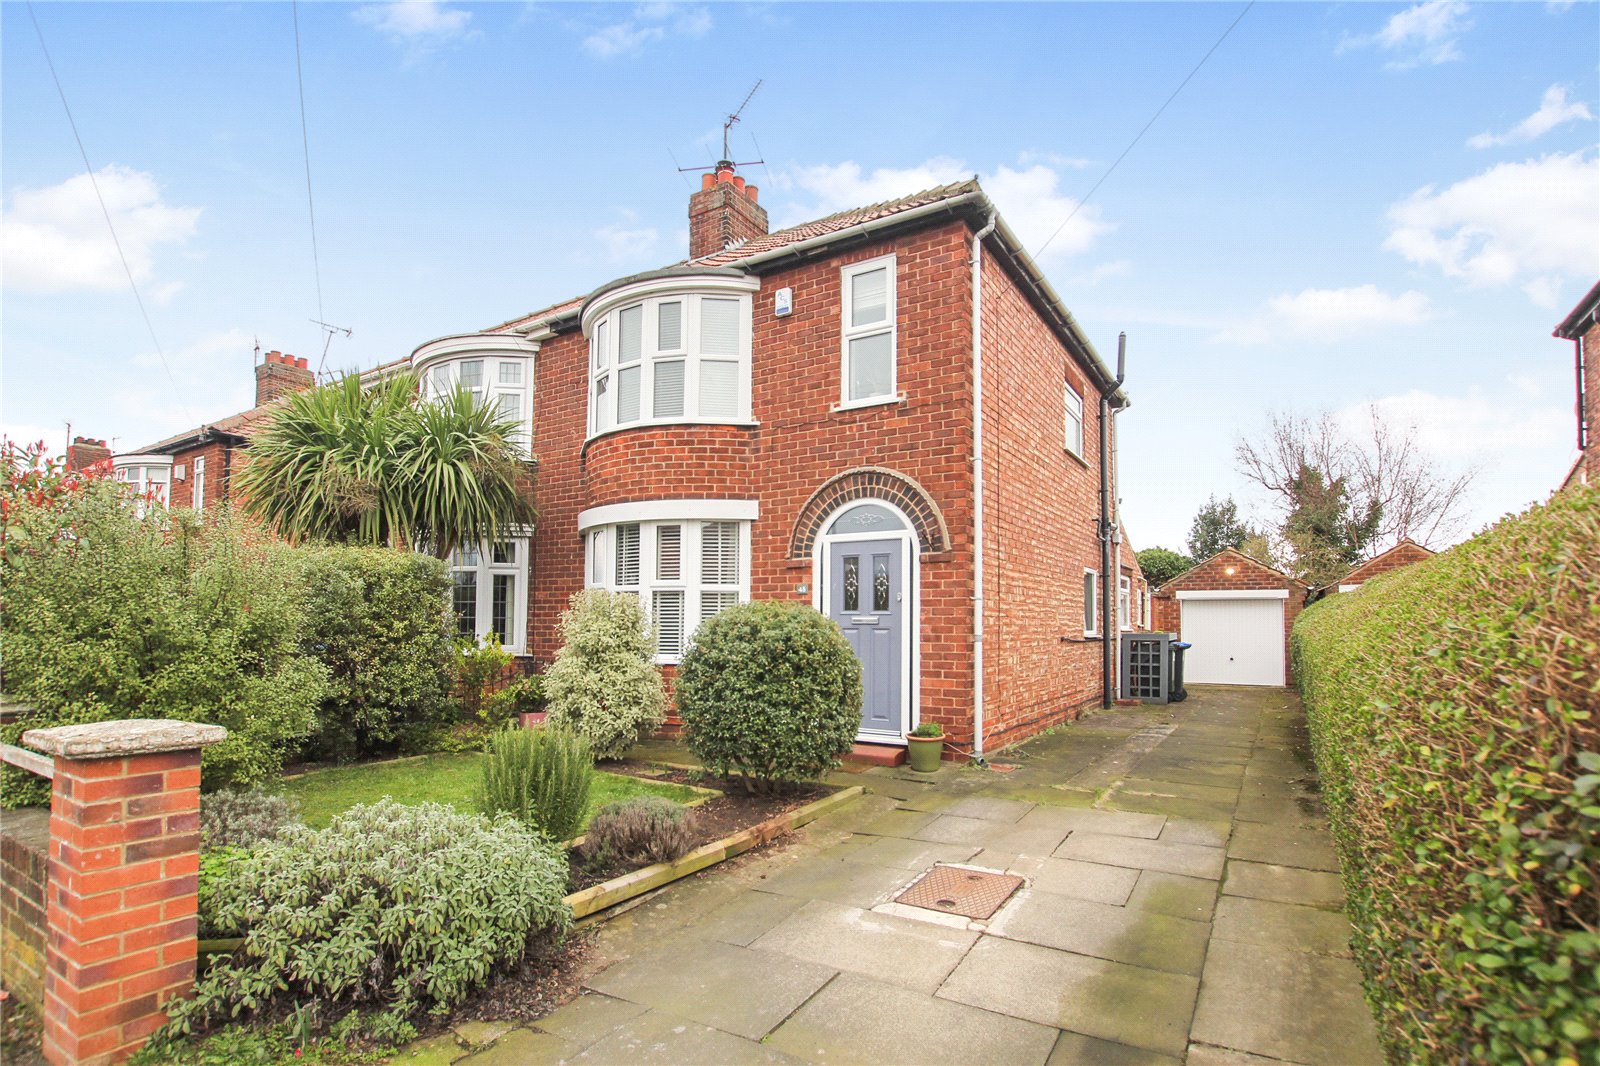 3 bed house for sale in Ridley Avenue, Acklam 1